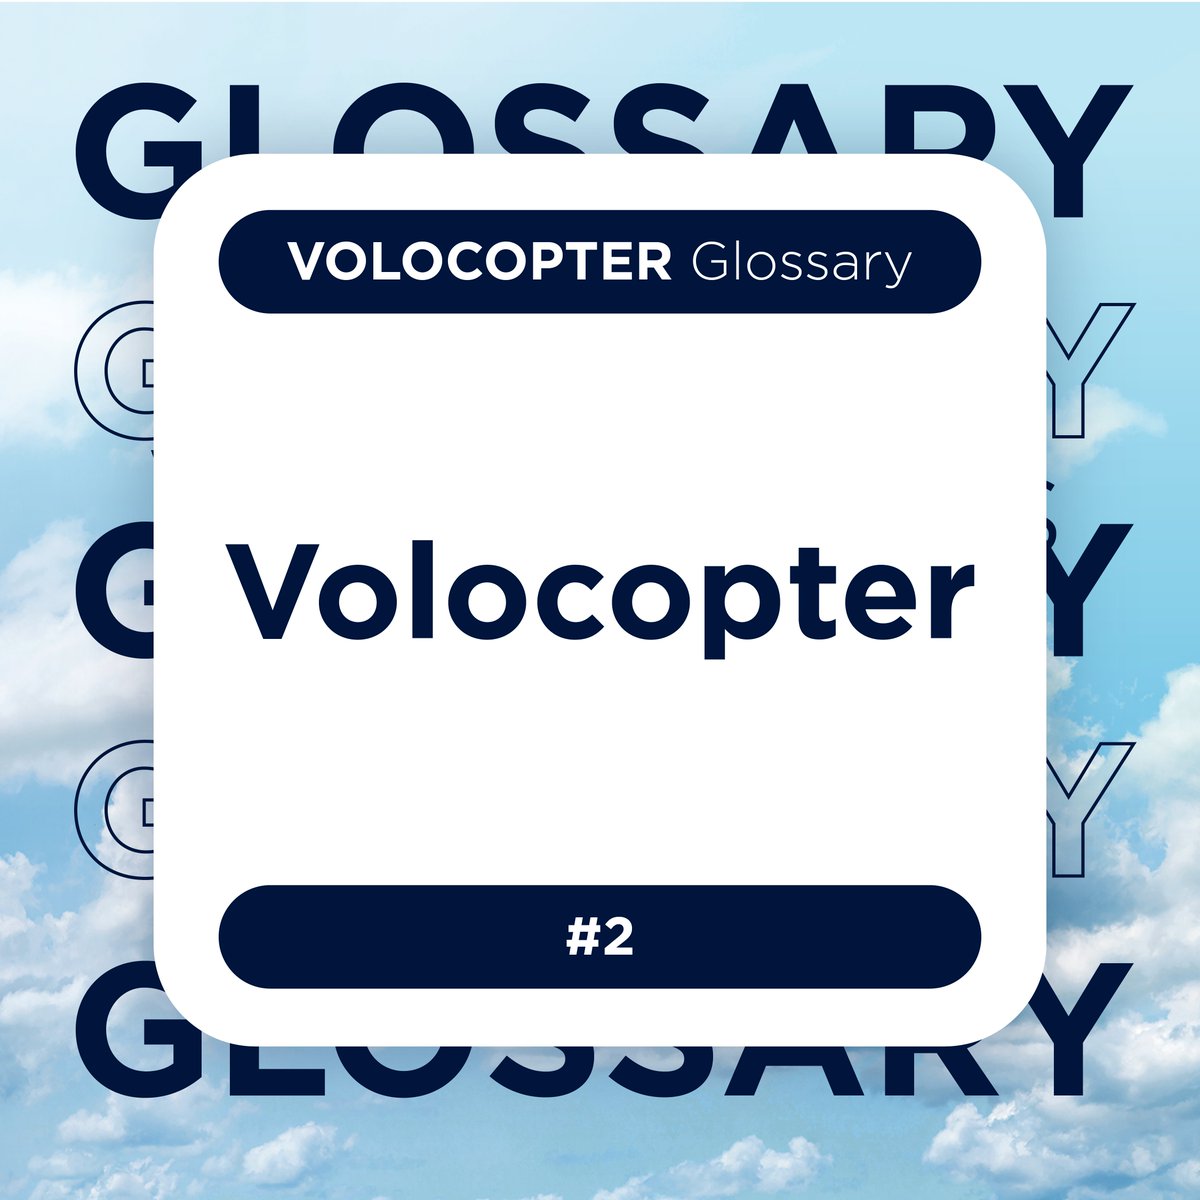 #VolocopterGlossary Volocopter, a company, pioneer, and an aircraft, bringing #UAM to megacities around the world.